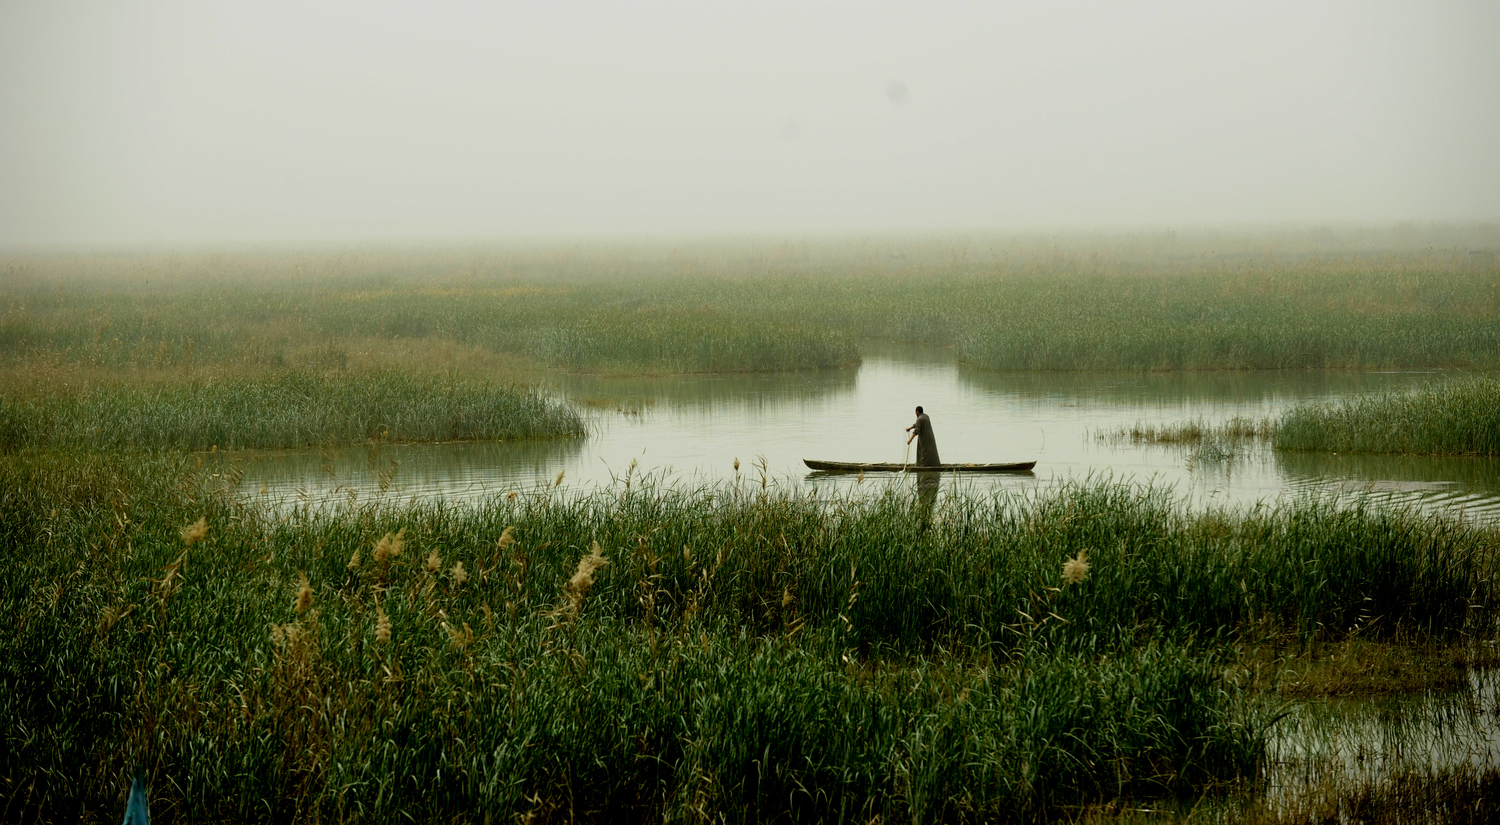 Mesopotamian Marshes - The Mystery Of Iraqi Marshes